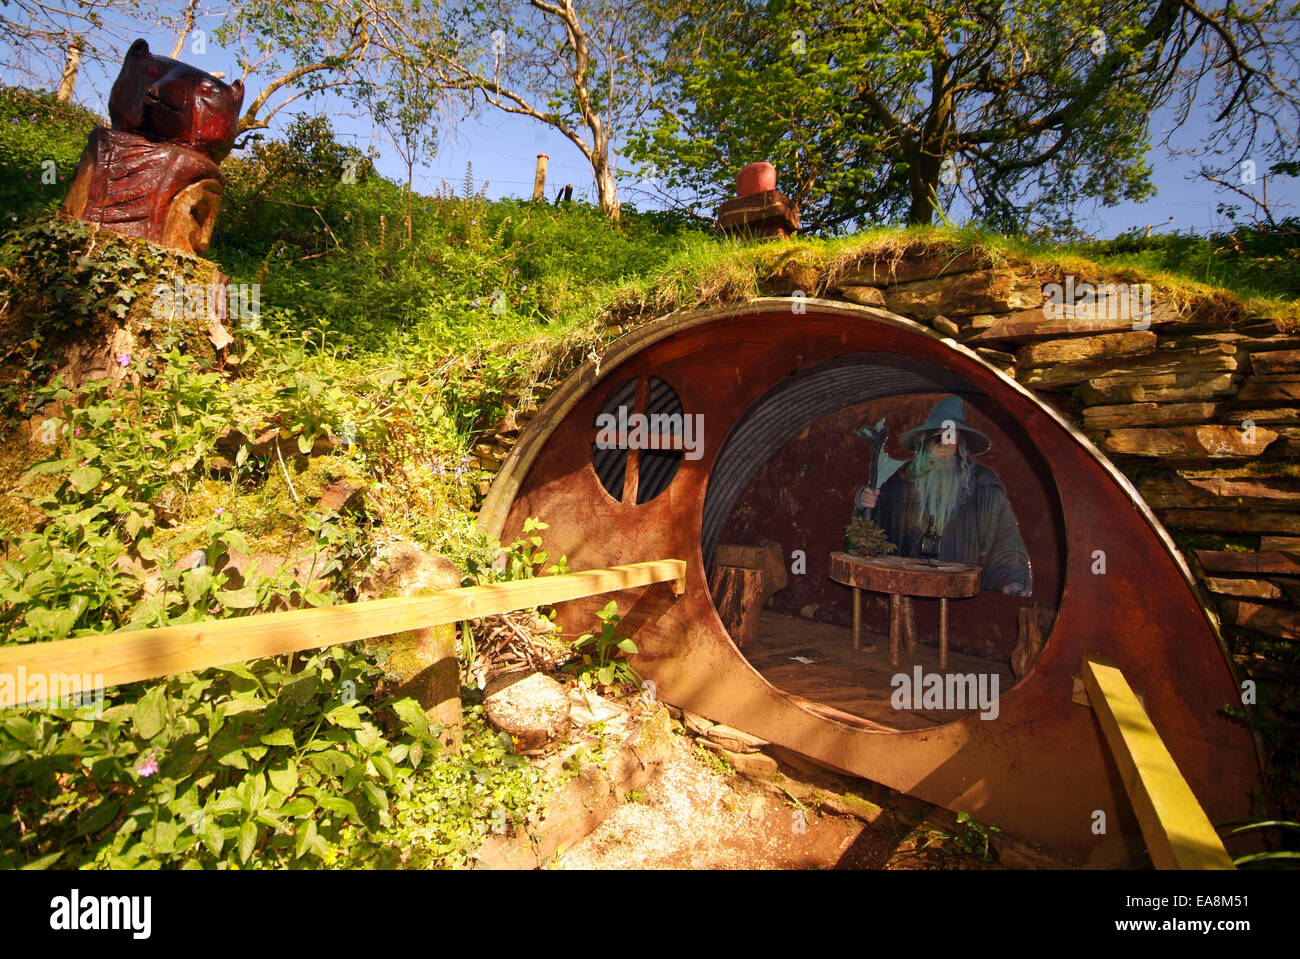 The Hobbit house Exhibit with the wizard Gandalf inside at the Carnglaze Caverns tourist attraction on wooded hillside of the Lo Stock Photo